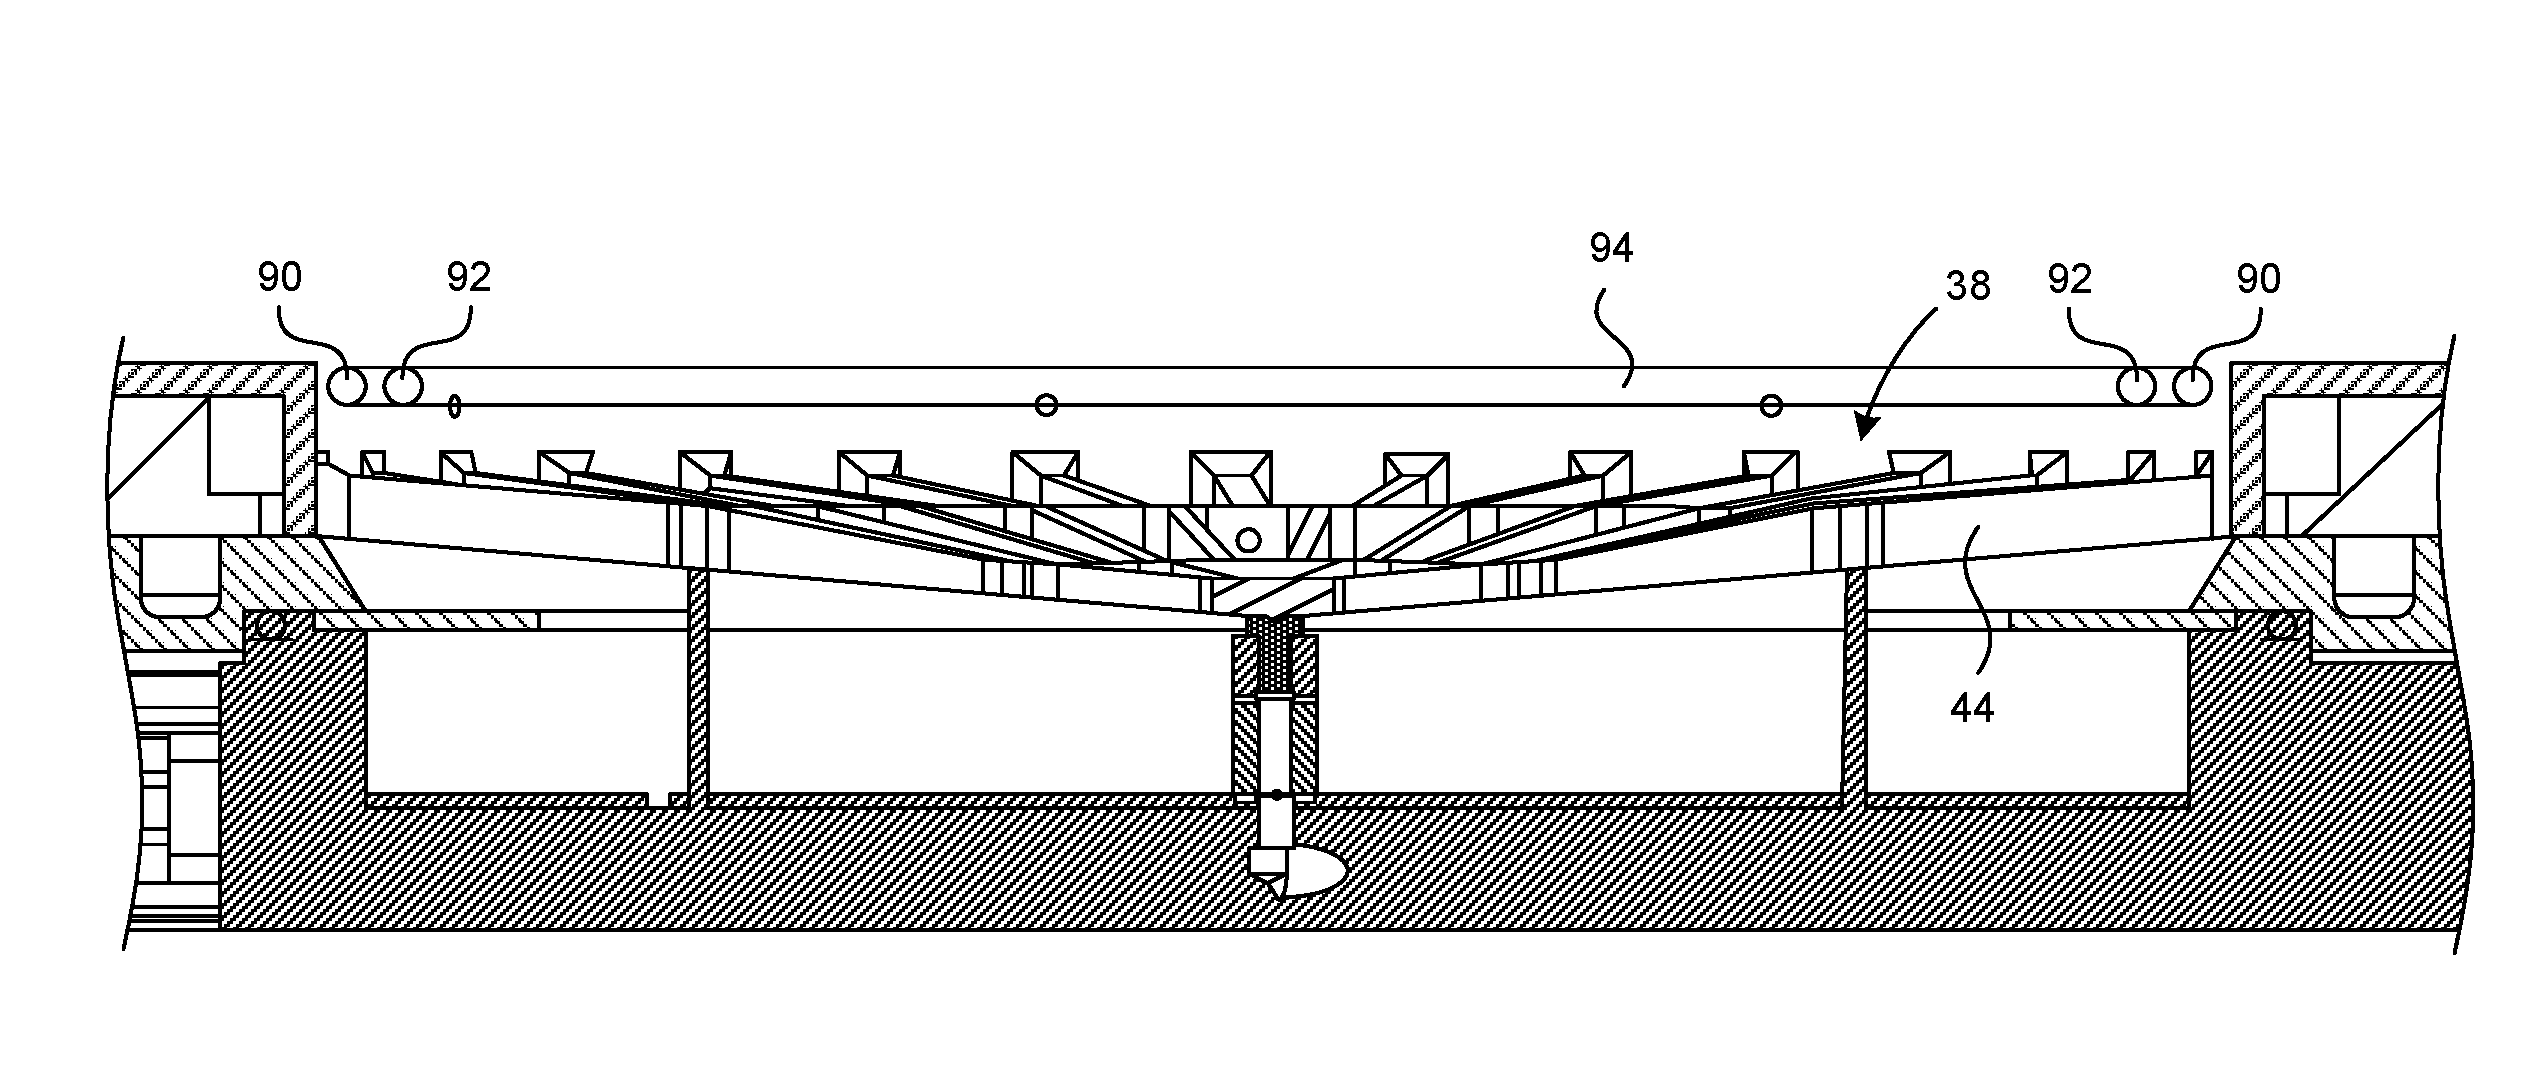 Electroplating apparatus with membrane tube shield